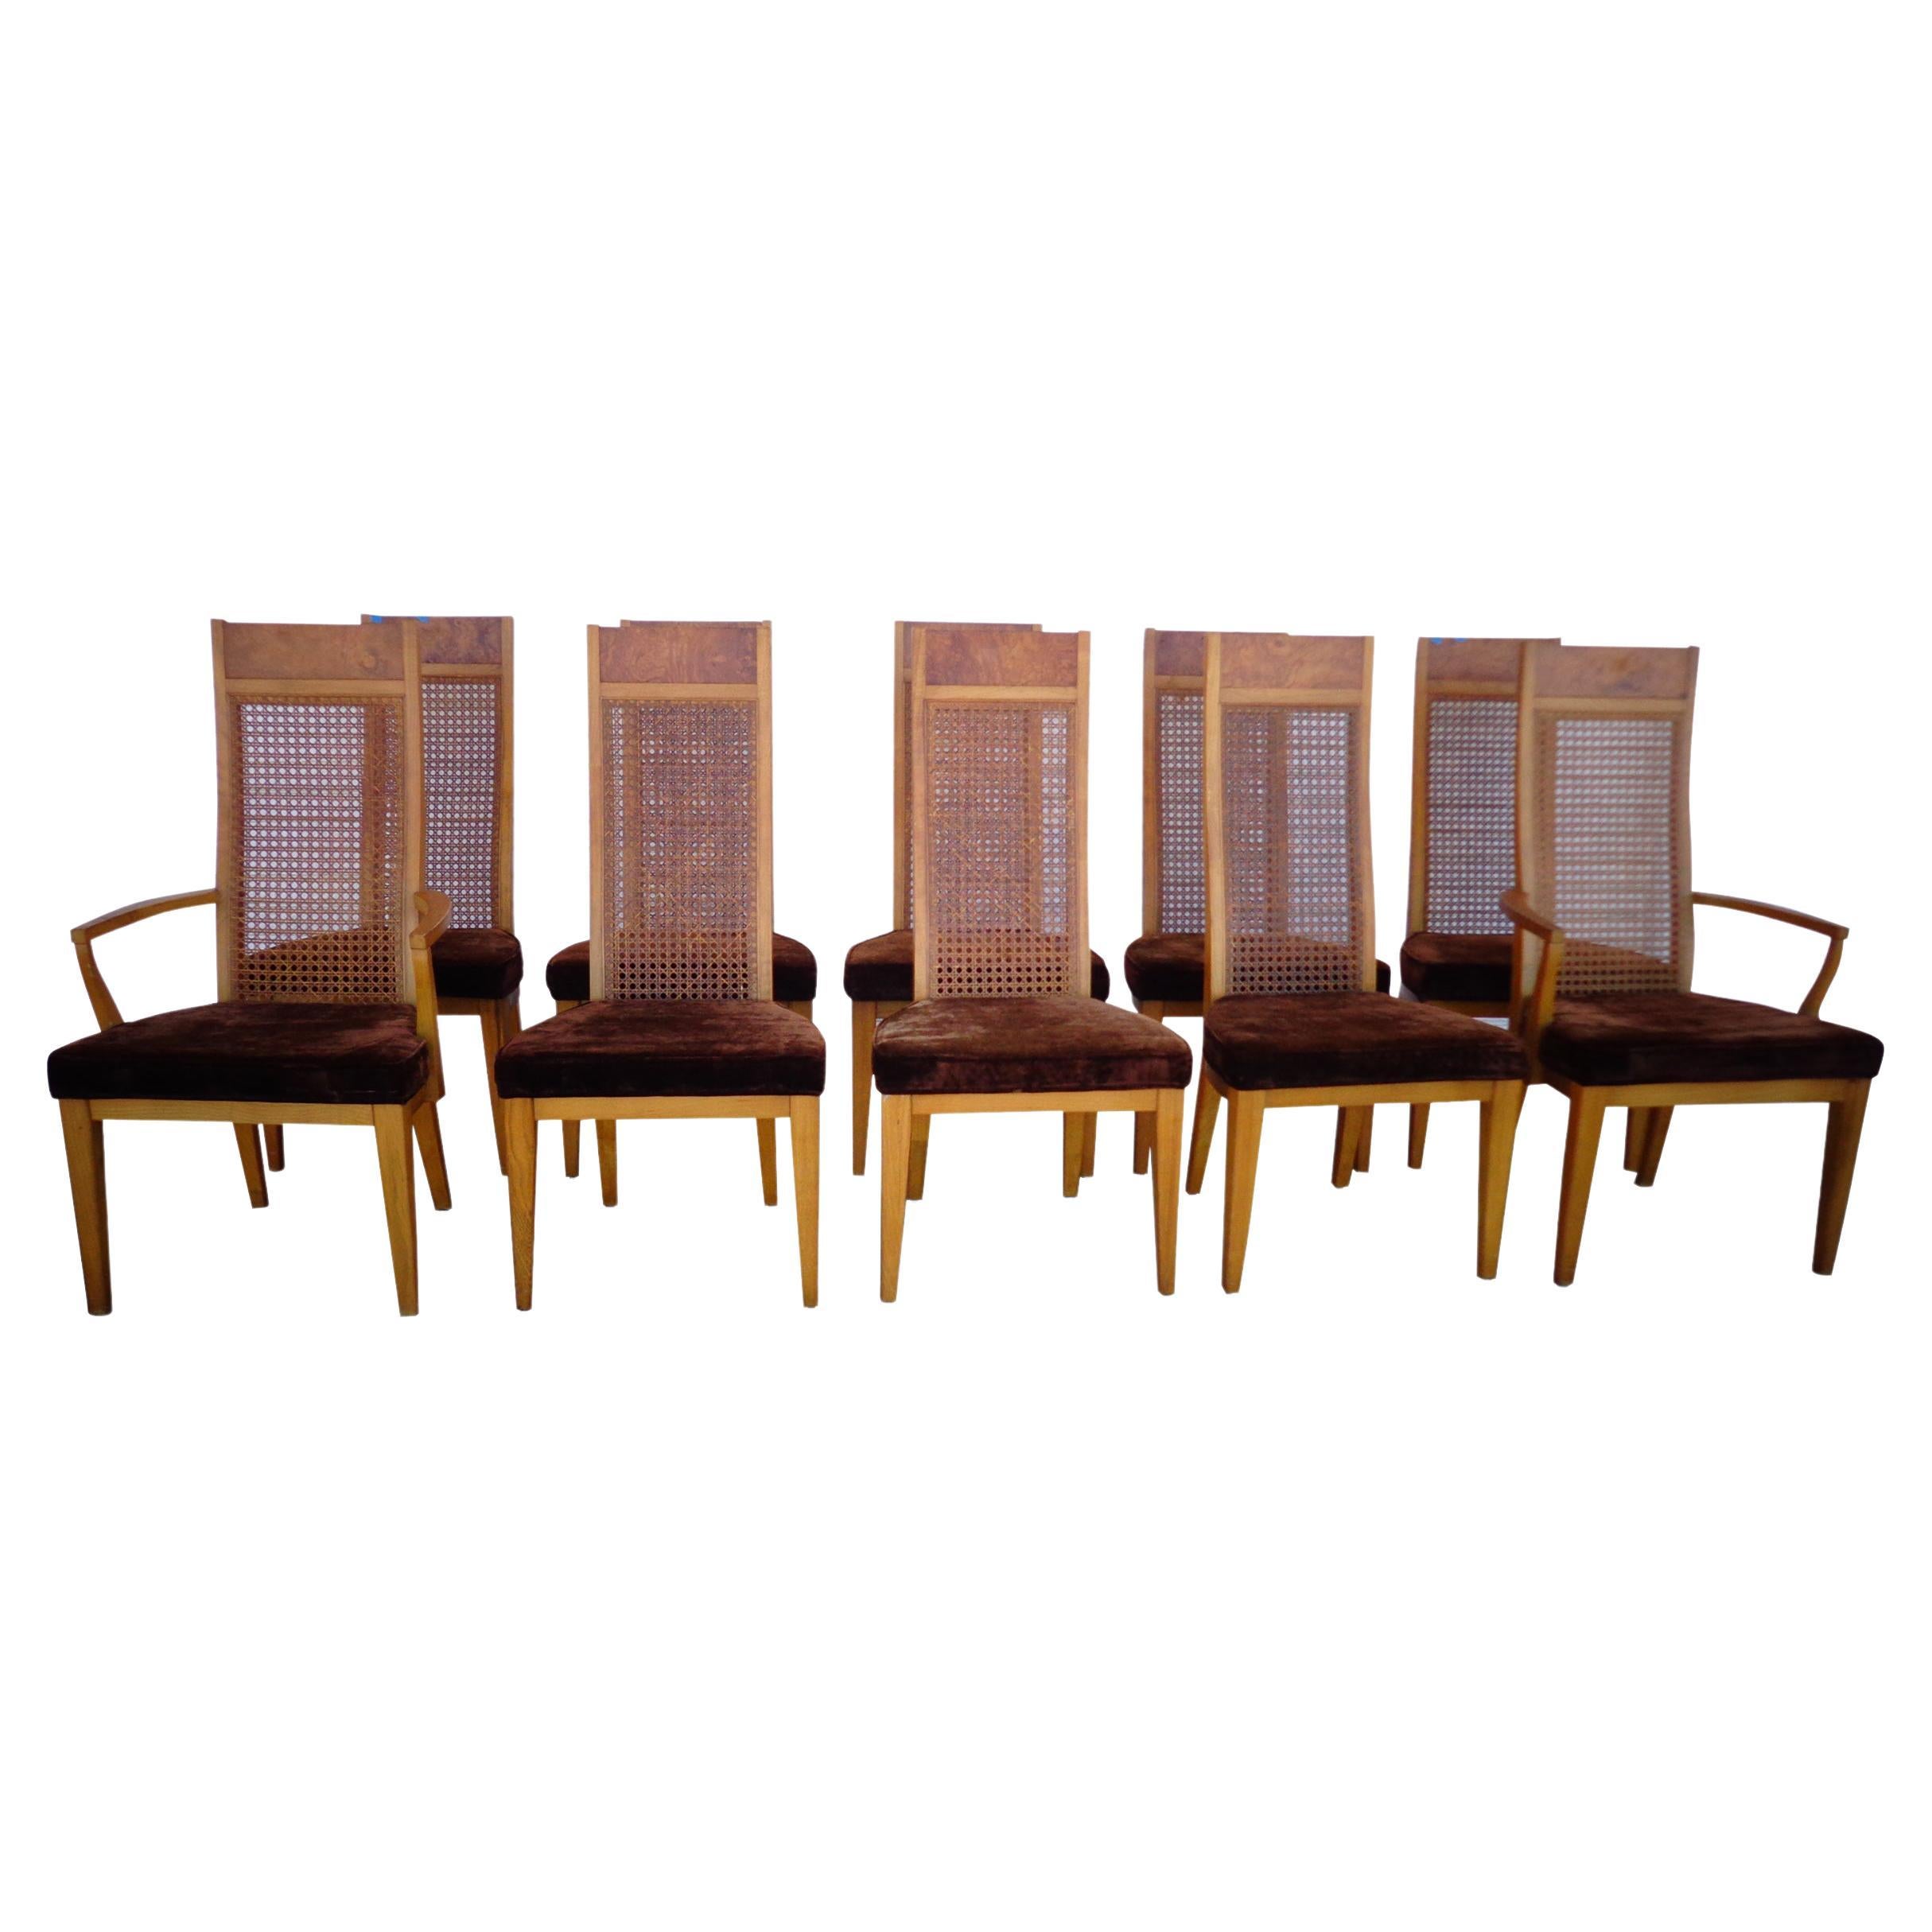 (1) High Back Dining Chairs by Lane Furniture 10 AVAILABLE

Rare set of high-back chairs in oak featuring cane backs and velvet upholstery.
Eight side and two armchairs.
 